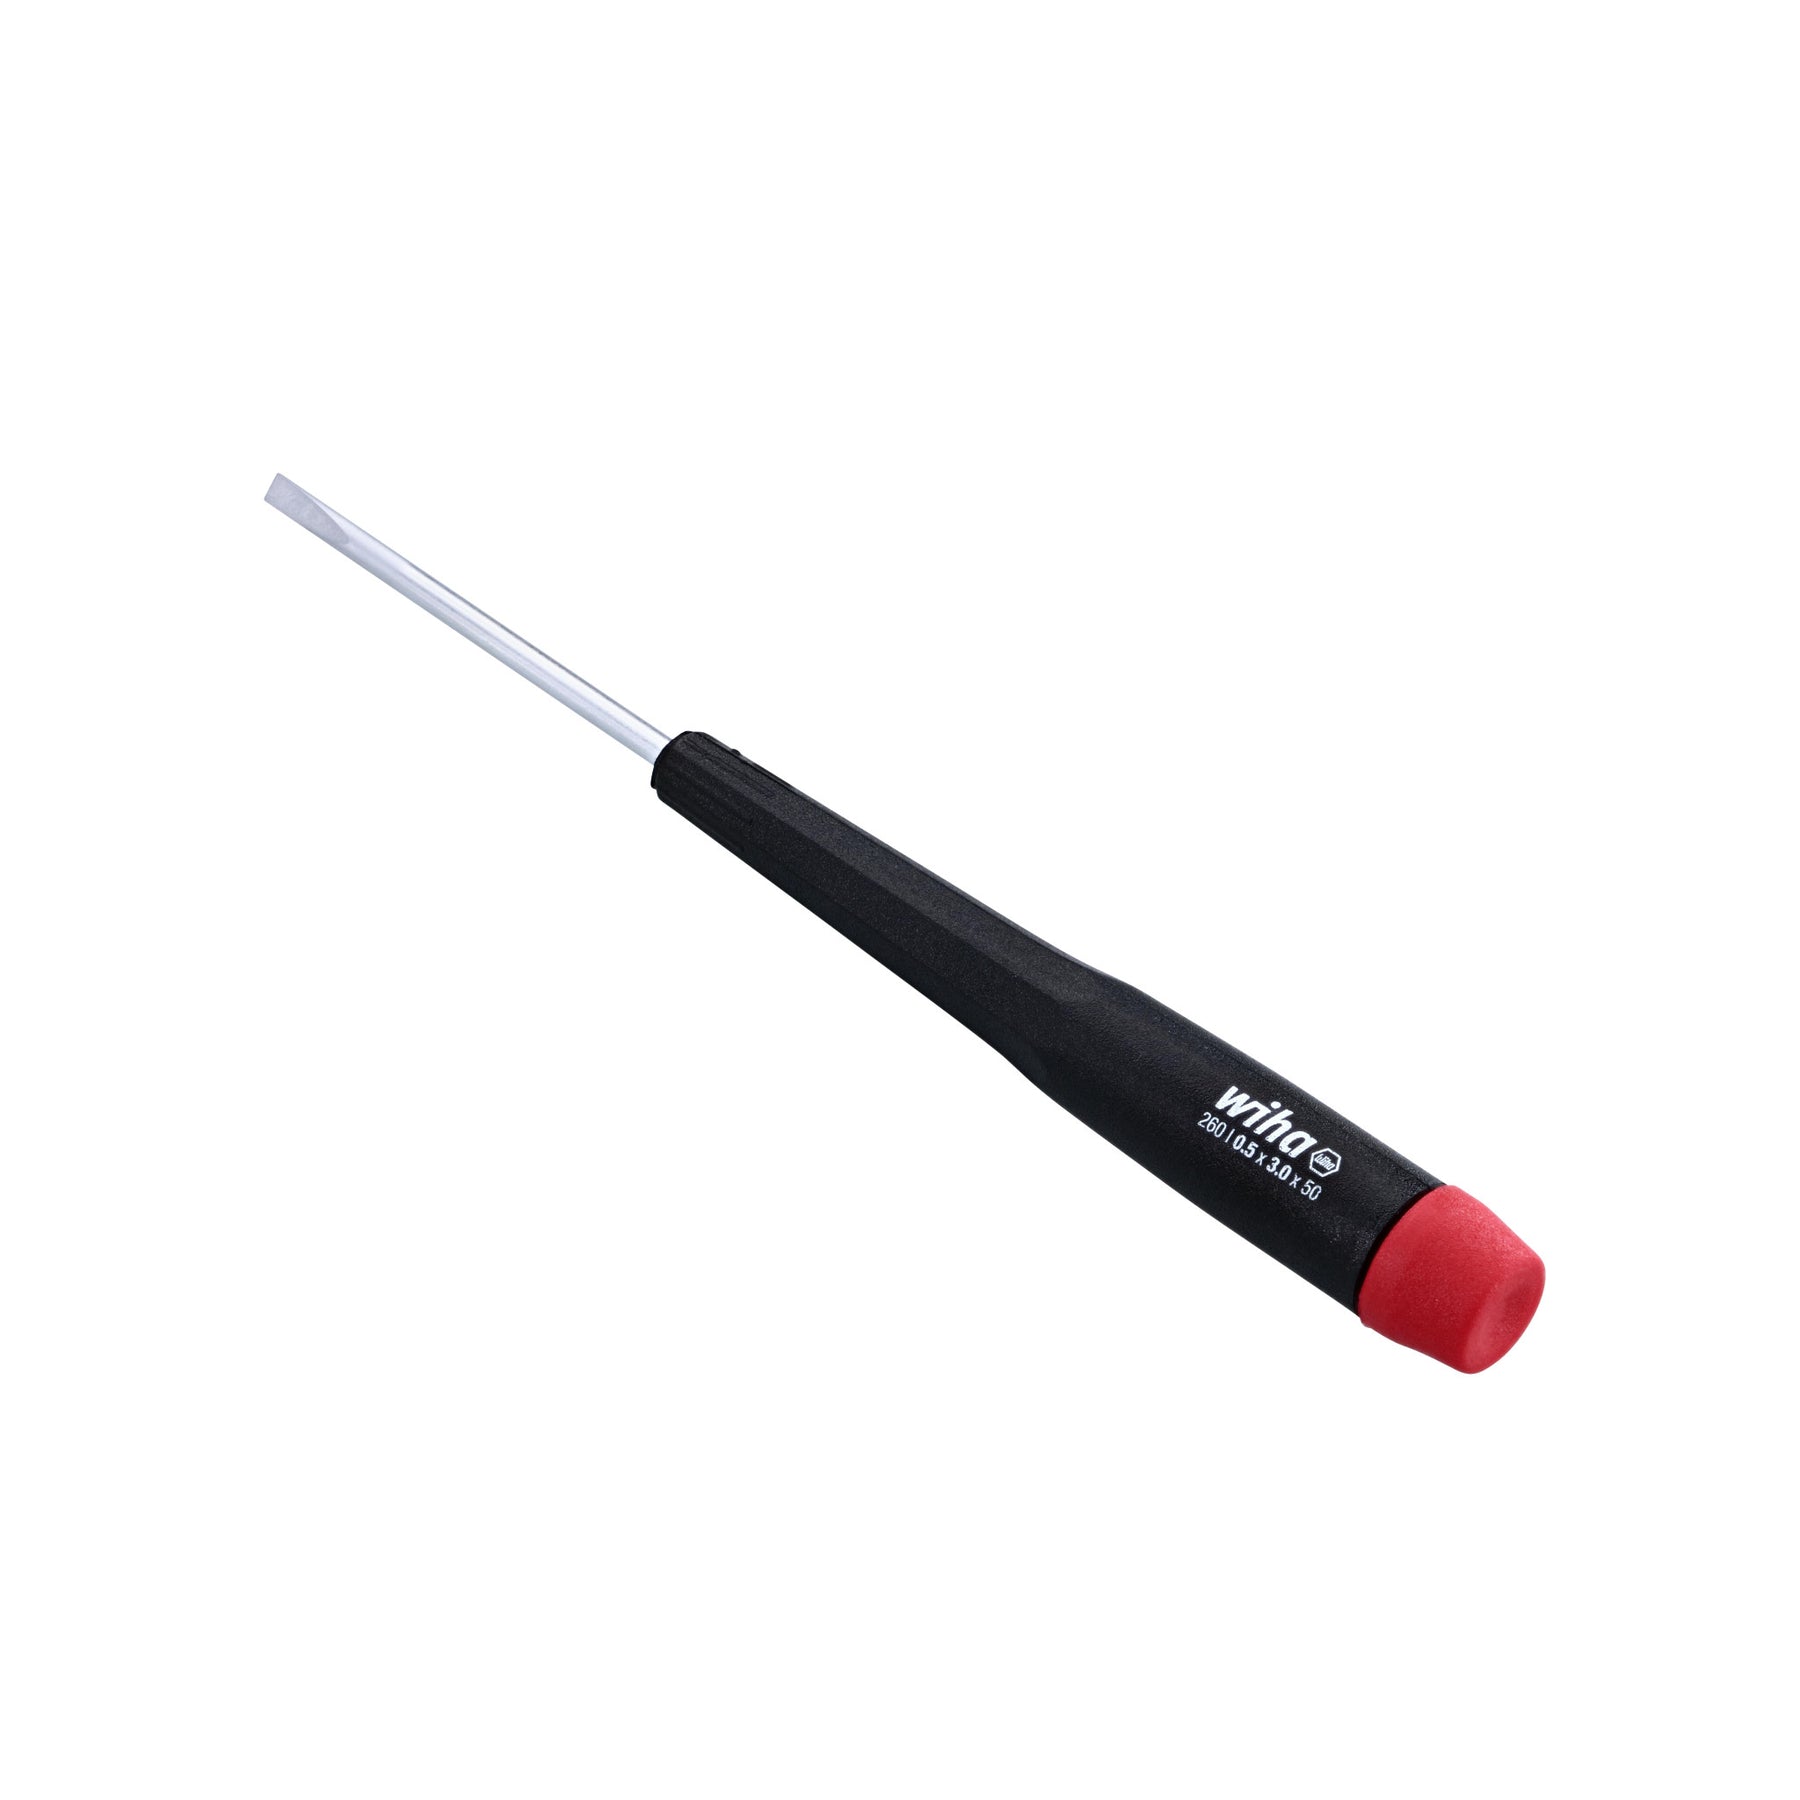 Precision Slotted Screwdriver 3.0mm x 50mm